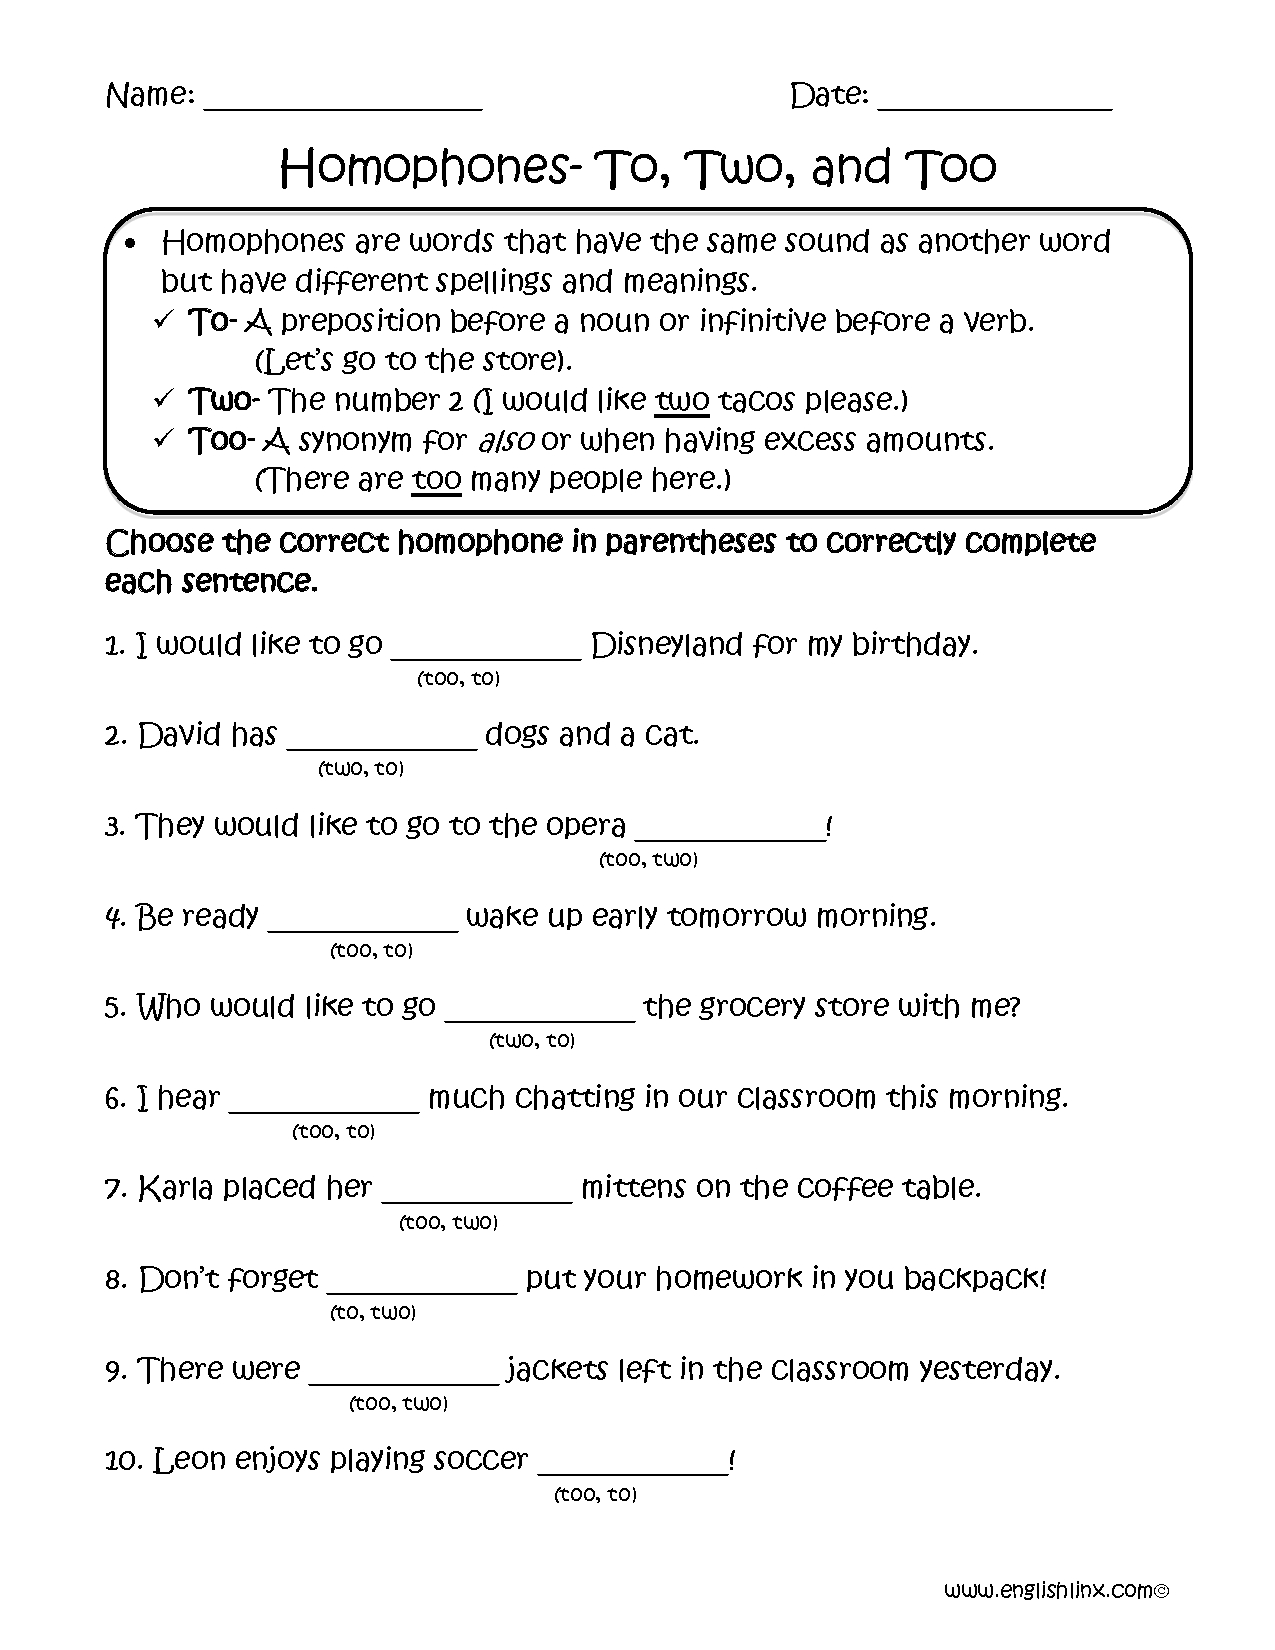 Homophones Worksheets For Grade 7 With Answers